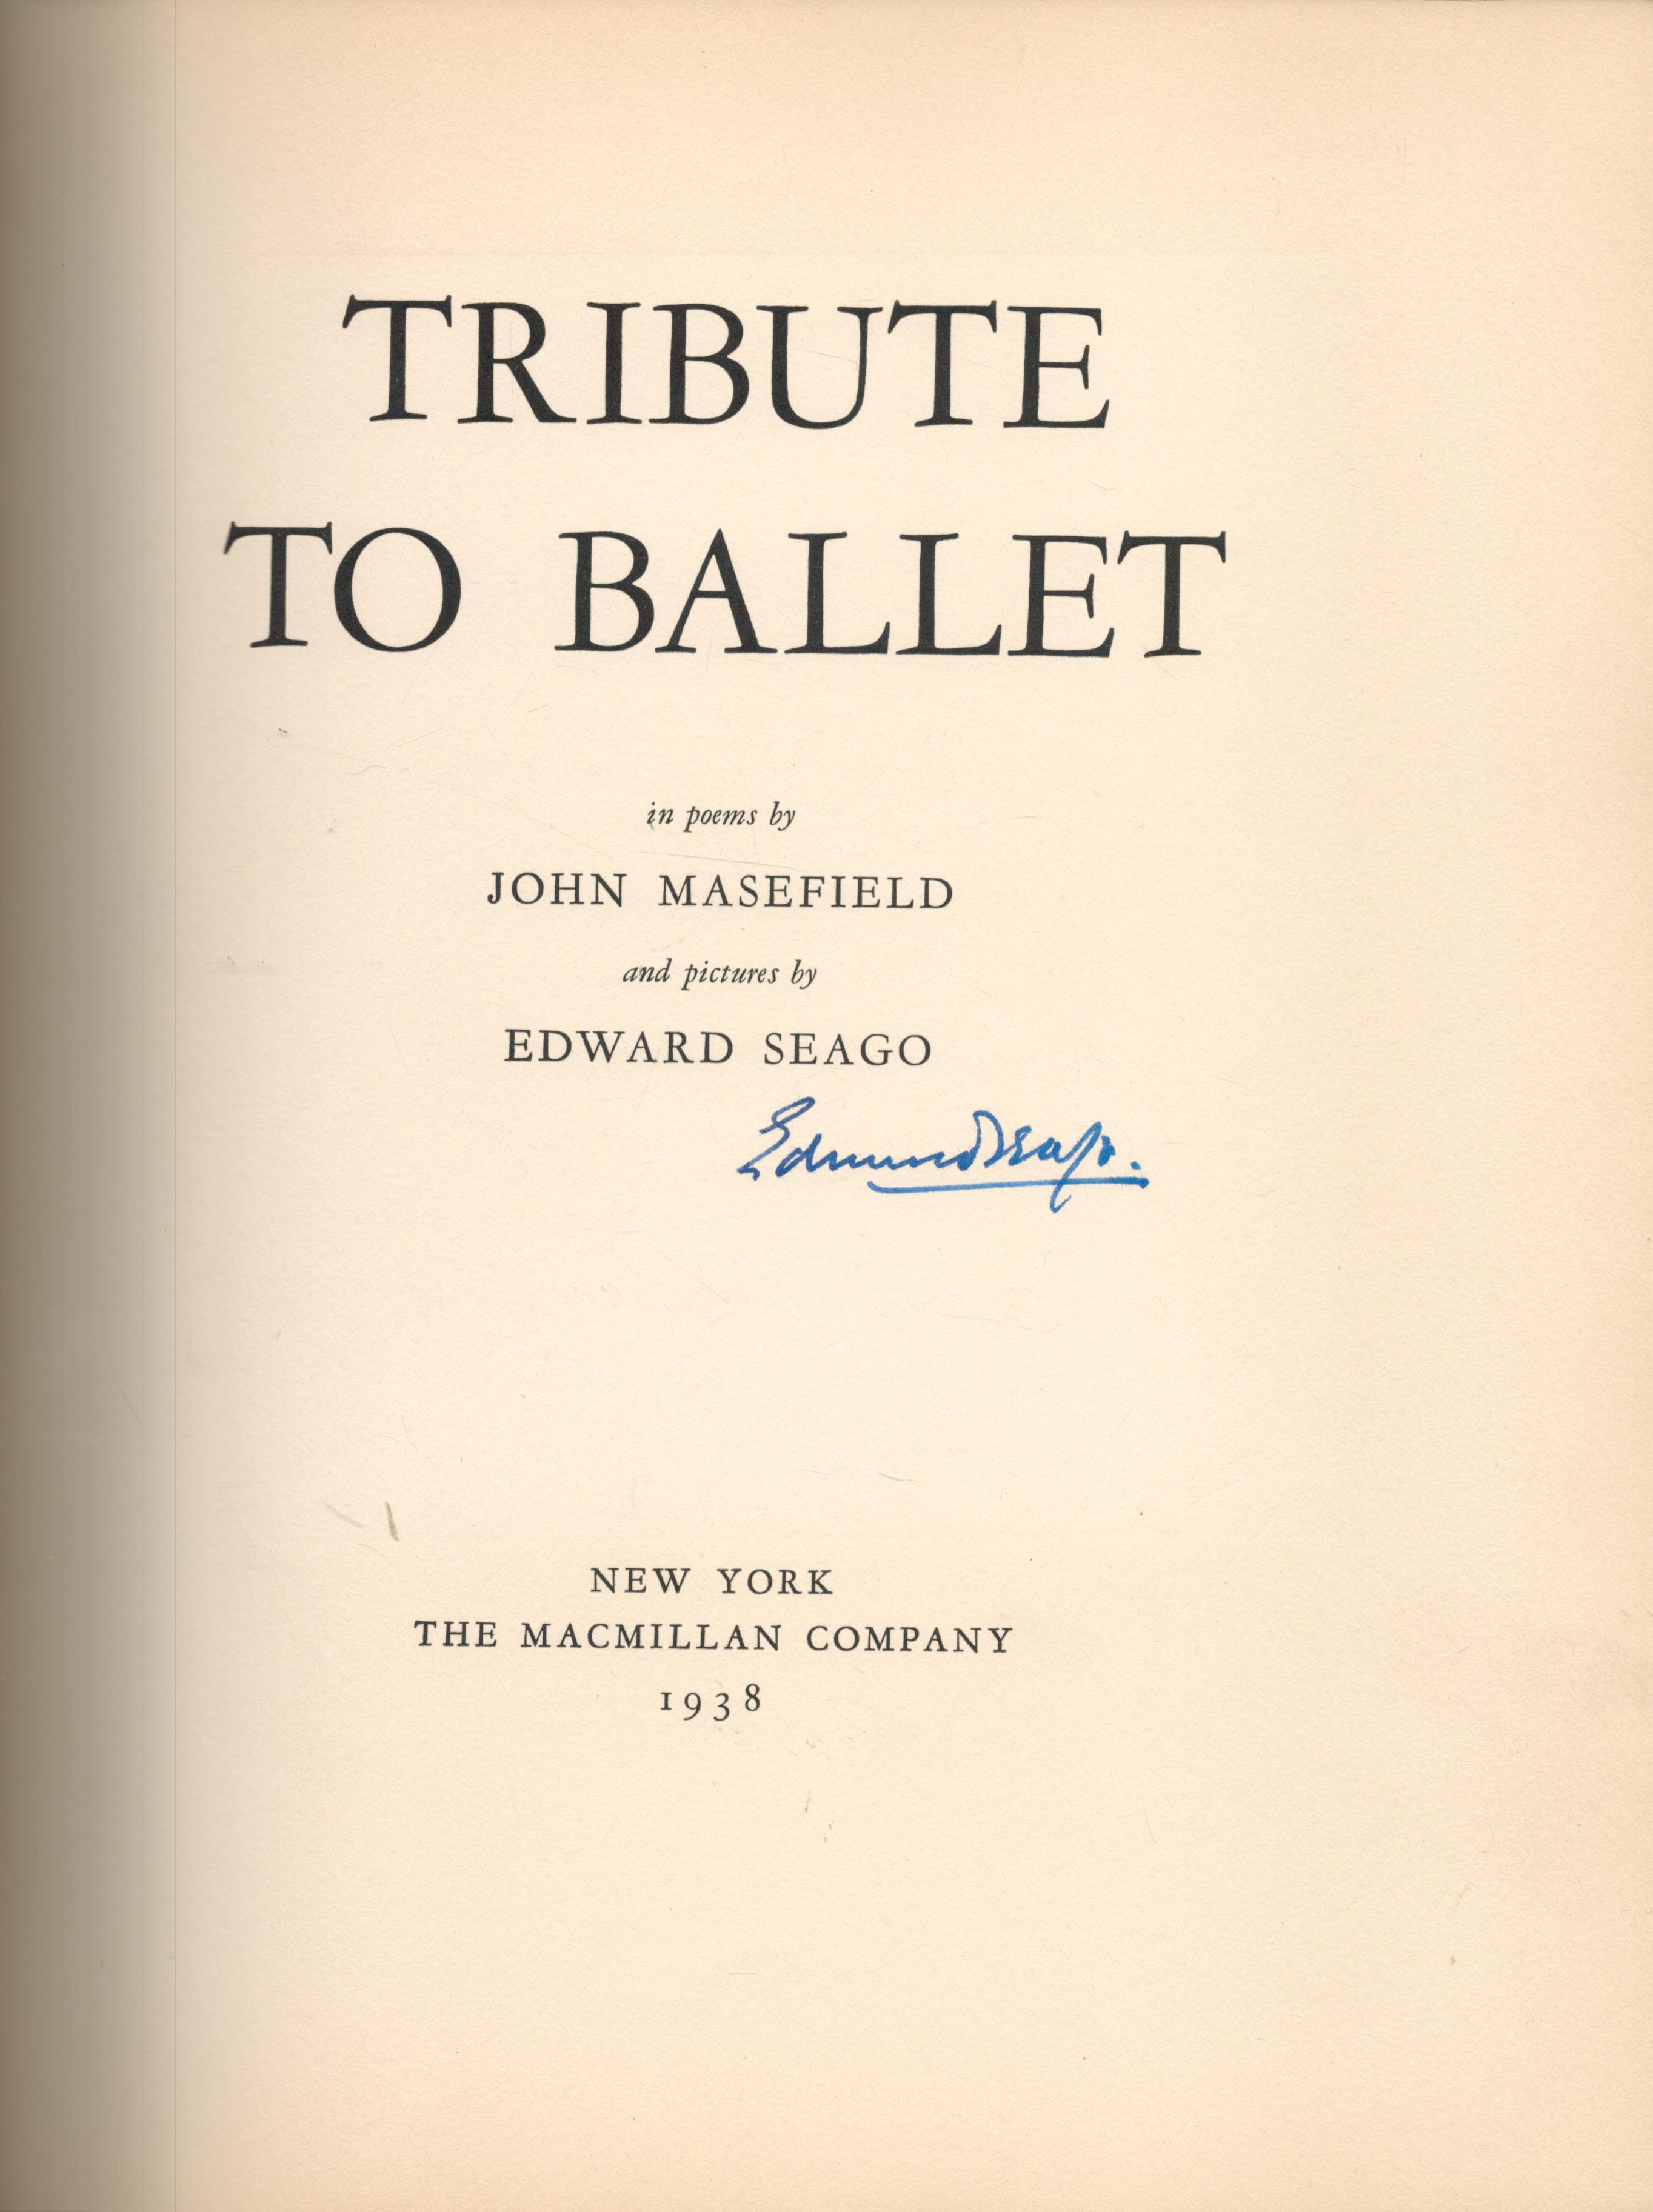 British Artist Edward Seago Signed Tribute to Ballet 1st Edition Hardback Book by John Masefield and - Image 2 of 3